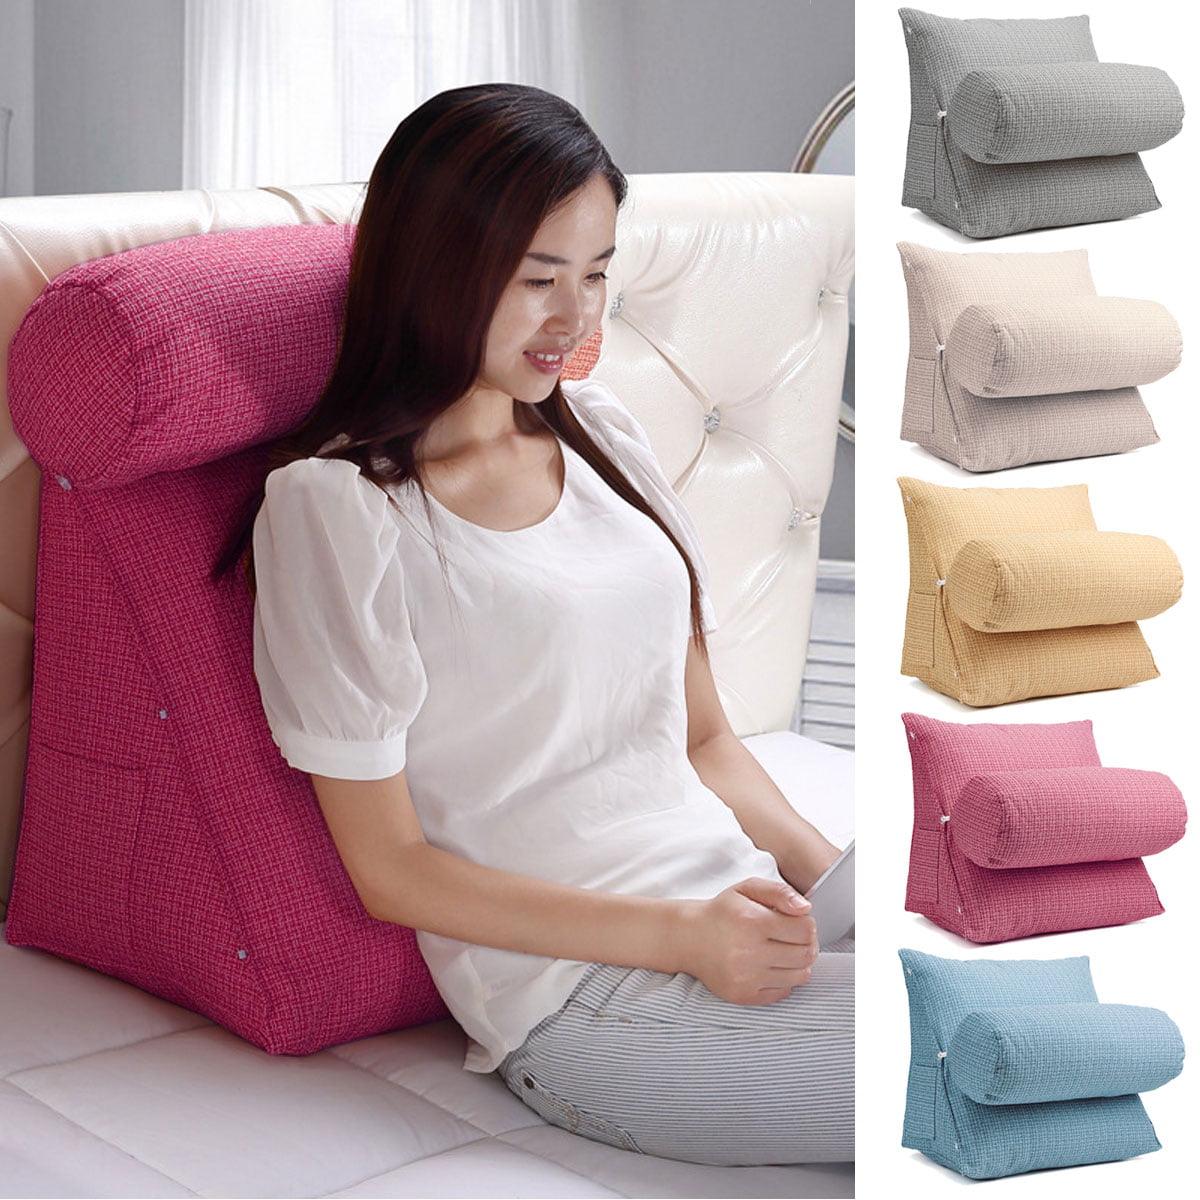 Bed Sofa Rest Lounger Cushion Waist Neck Back Support Wedge Backrest Pillow Home 